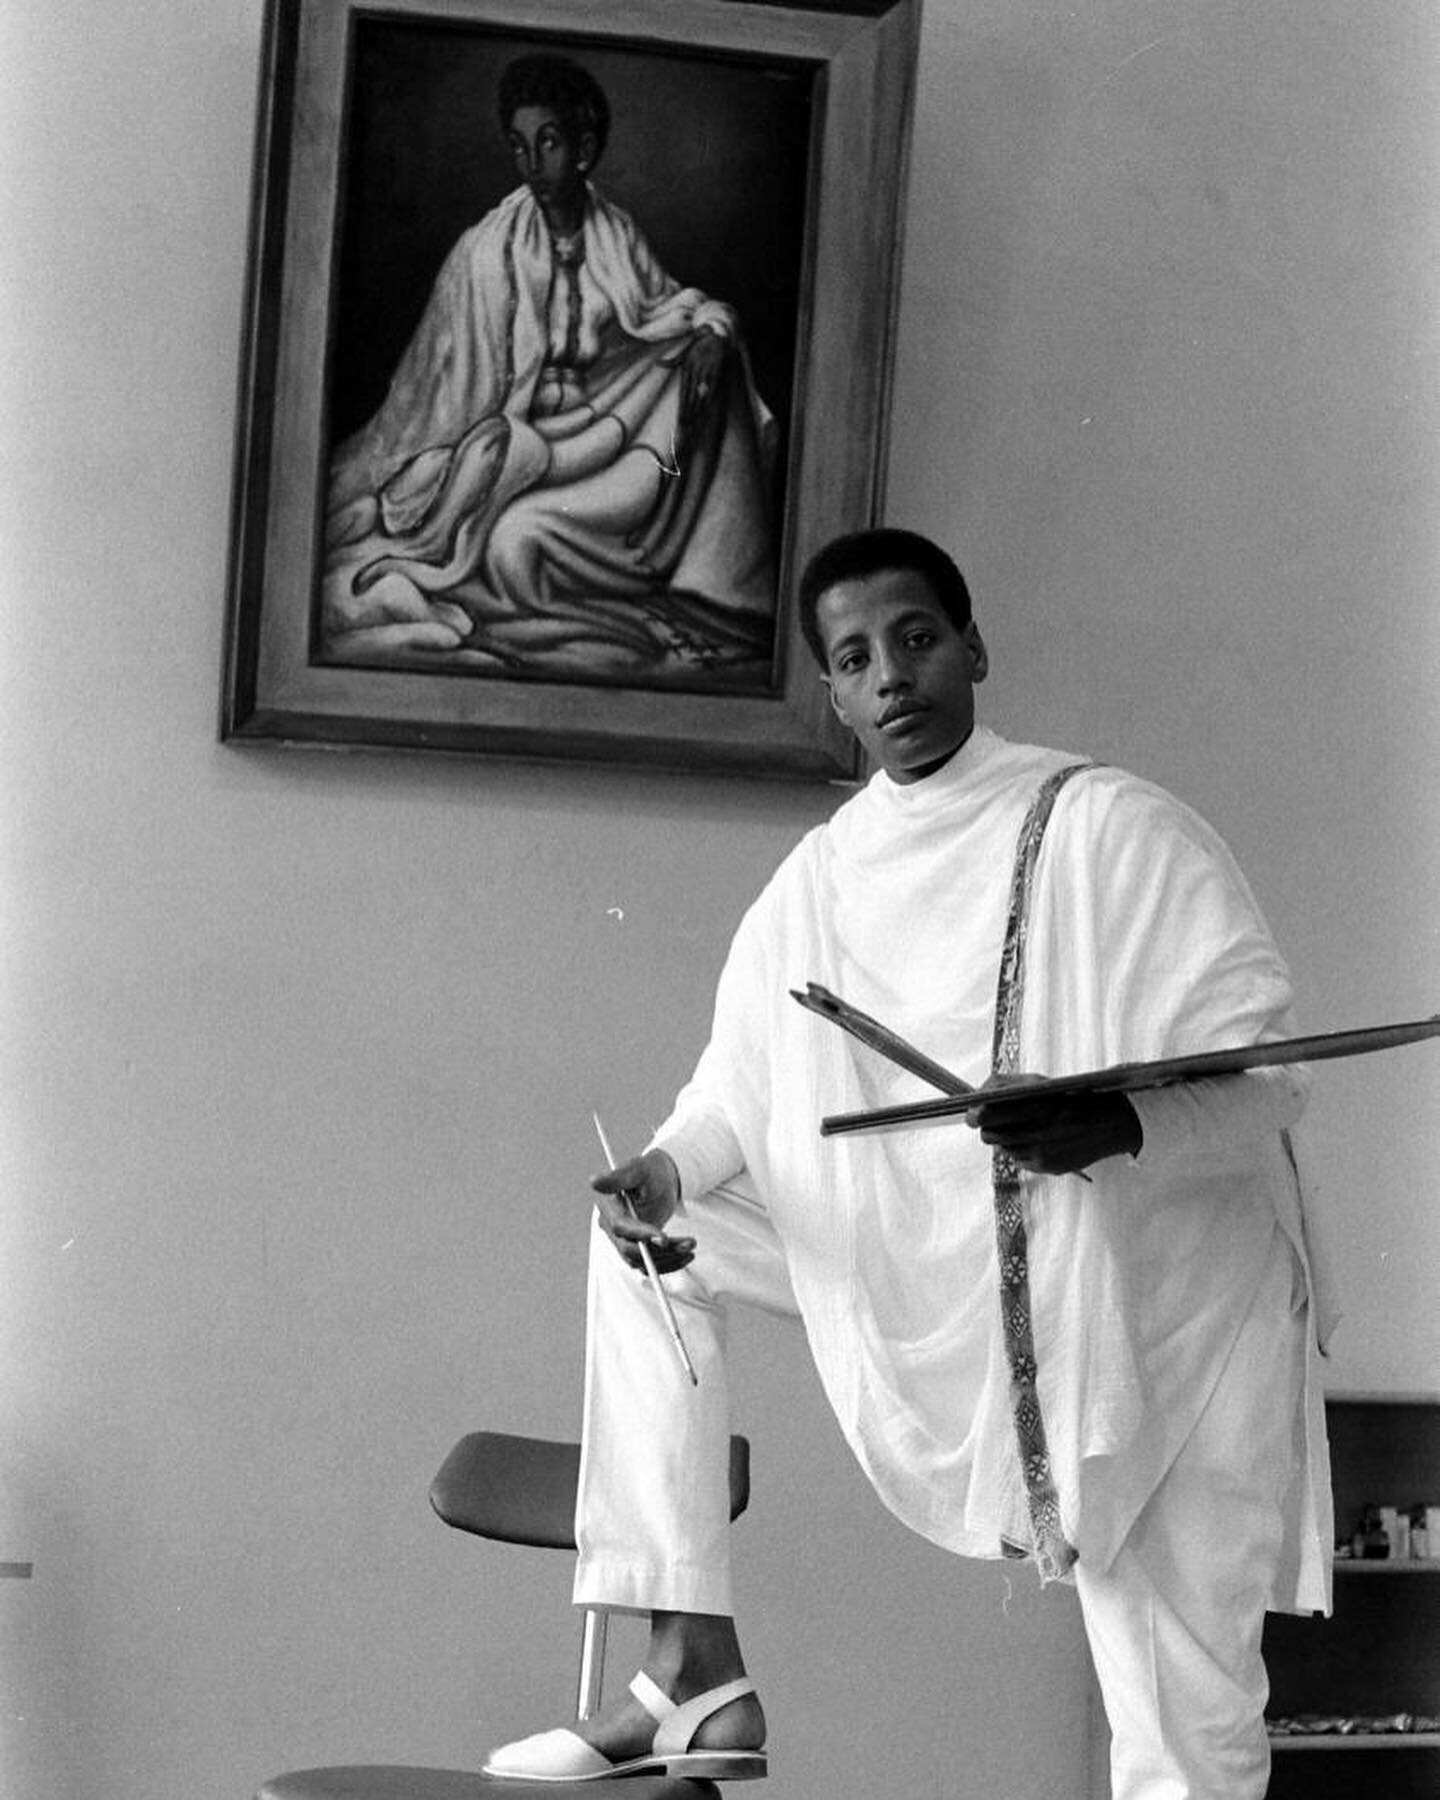 Celebrated and leading Ethiopian modern artist, Afewerk Tekle, in his studio in 1955. Images 3 and 4 feature two of Tekle&rsquo;s portrait sitters. Photographs by Alfred Eisenstaedt for LIFE magazine. Courtesy of the LIFE Photo Collection.

#SUNUnote